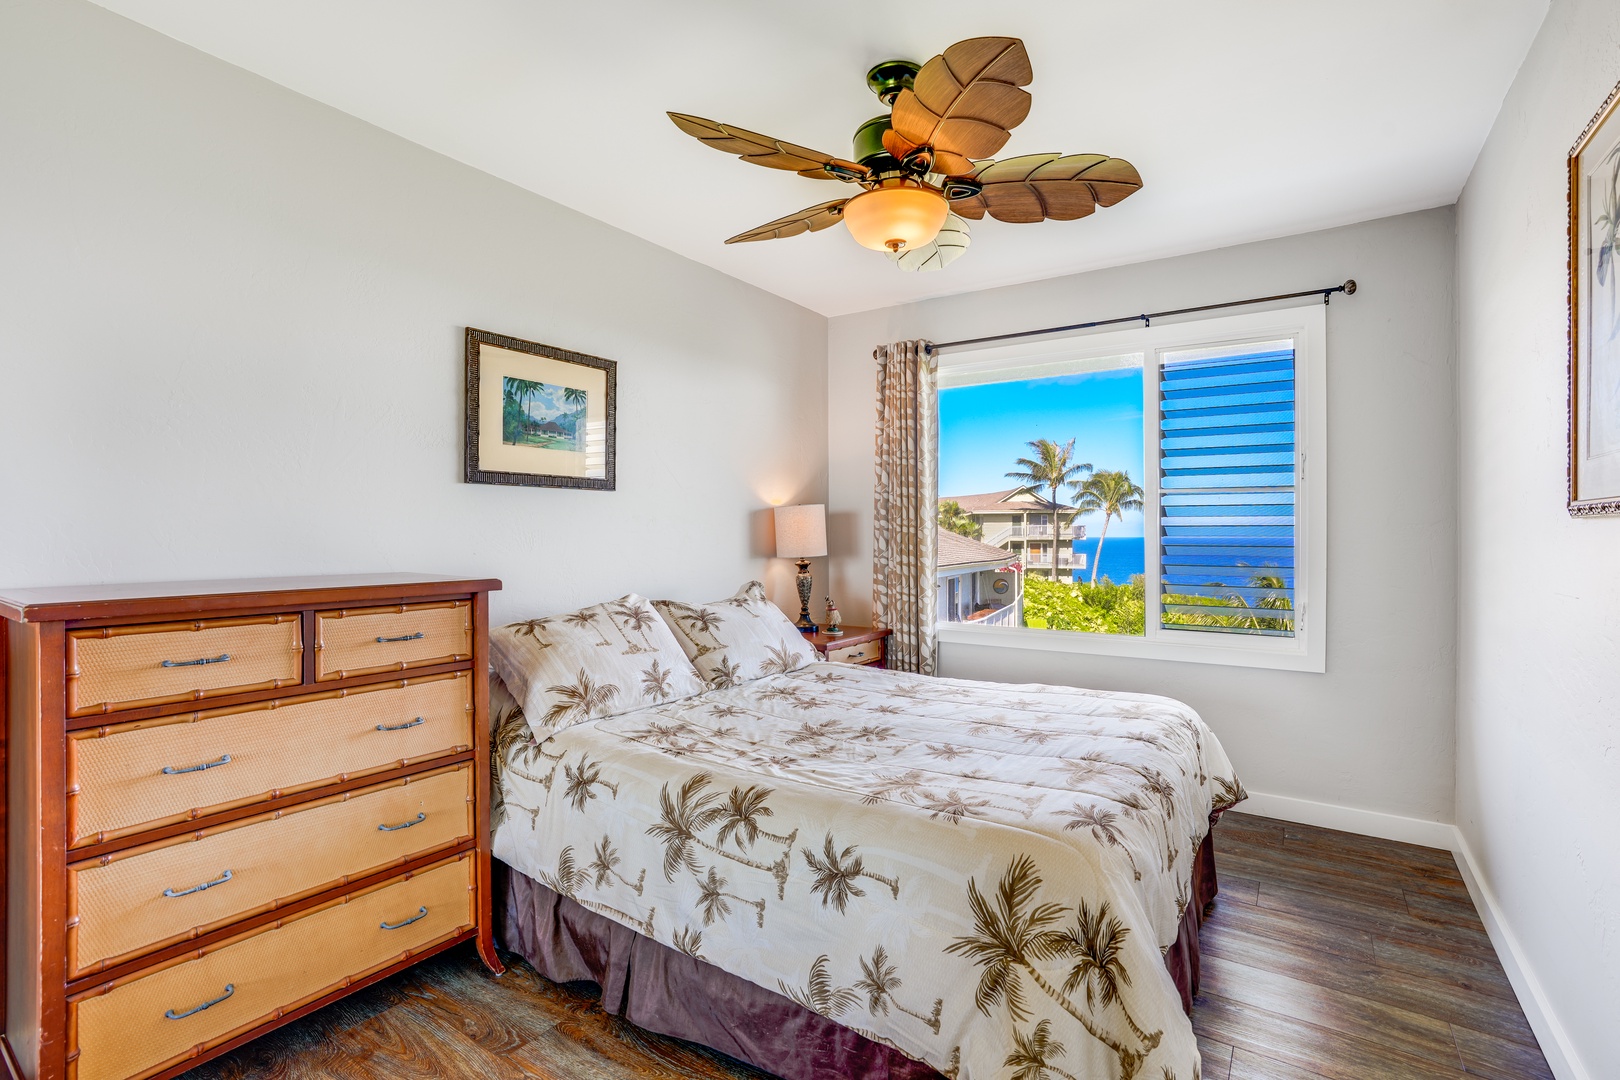 Princeville Vacation Rentals, Alii Kai 7201 - The second bedroom, equally inviting, features a queen bed, ensuring a restful night's sleep.